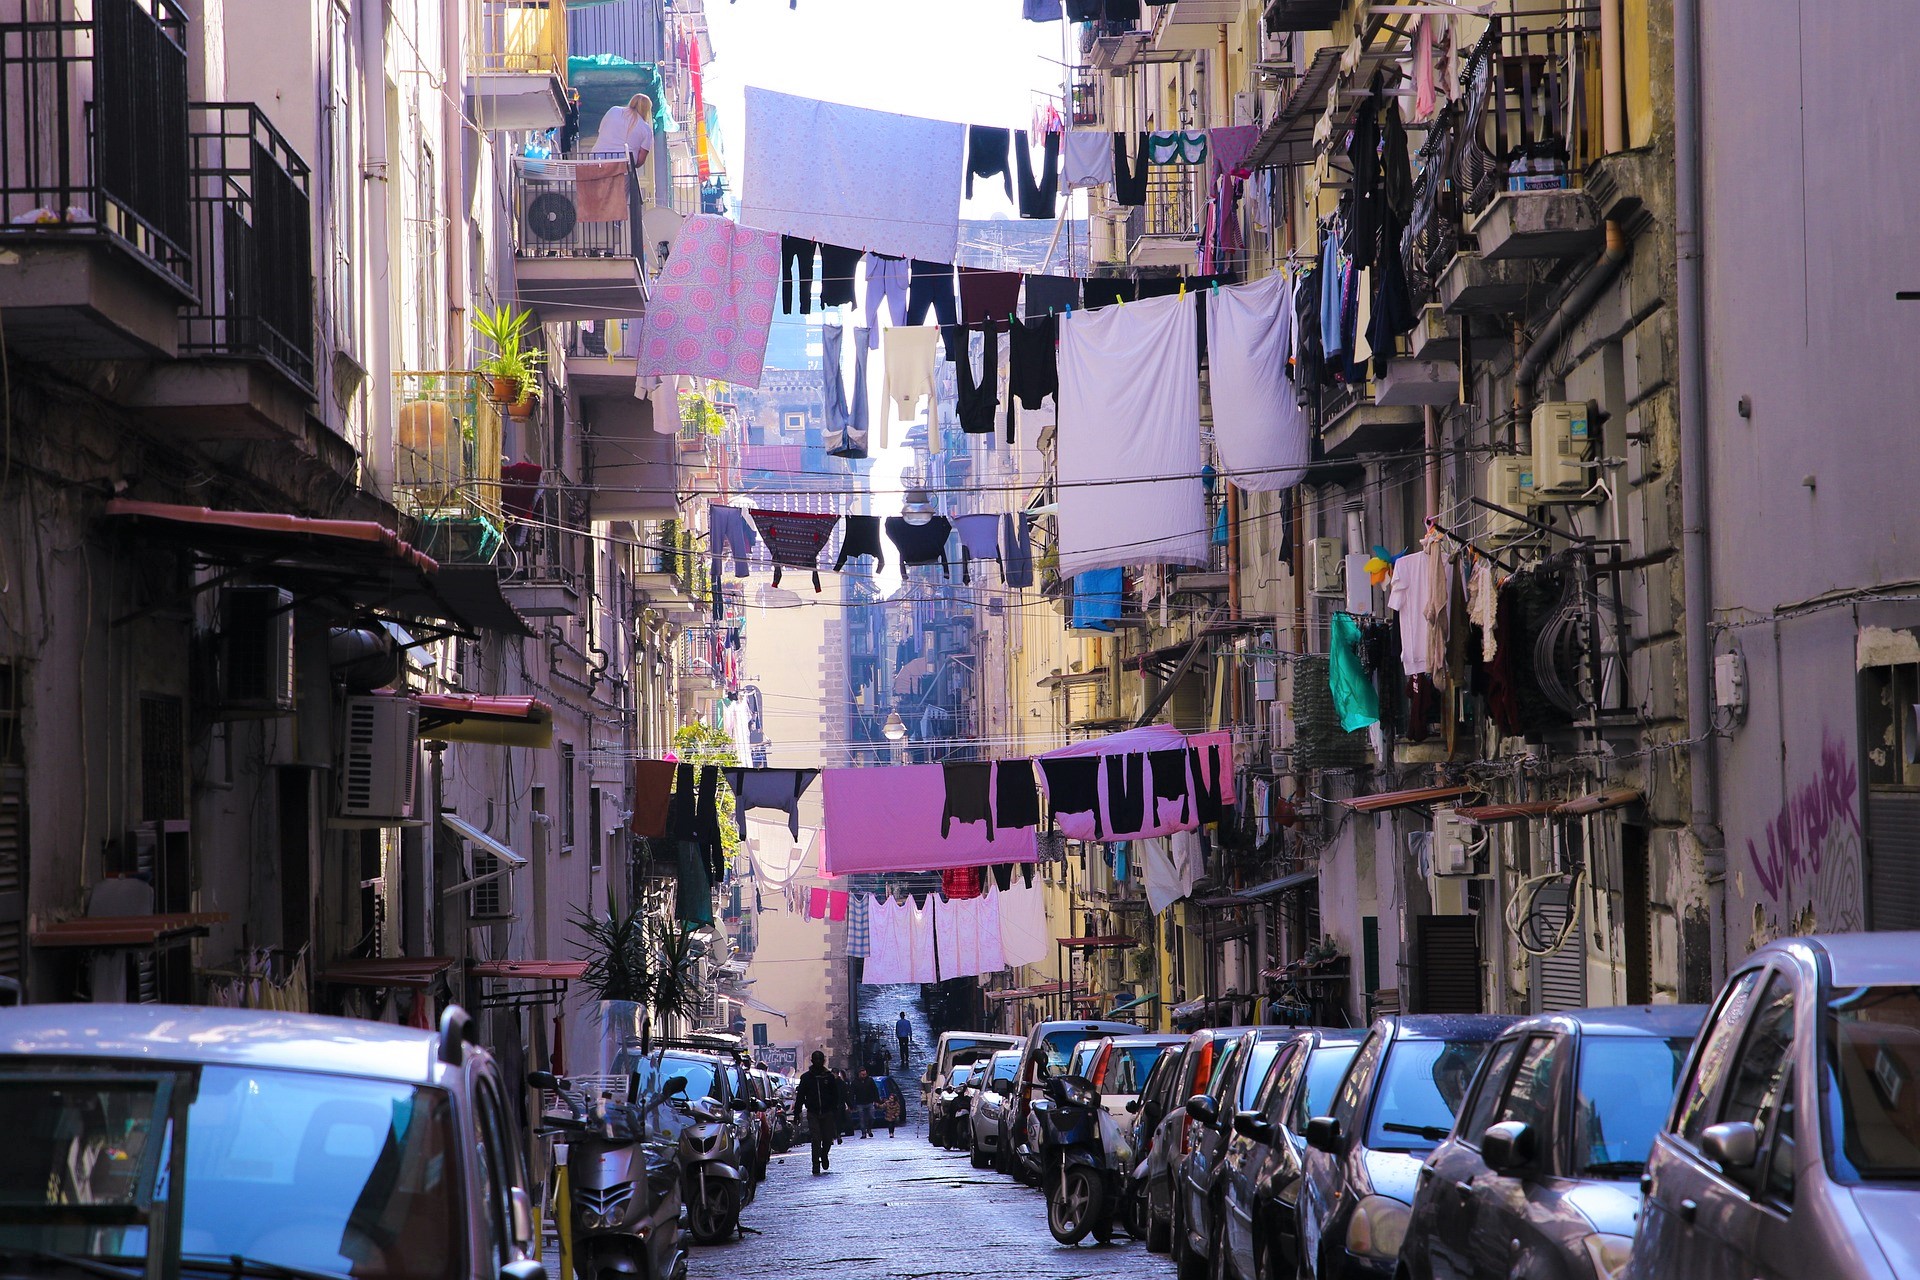 Laundry lines hanging above one of the narrow streets of Naples in Italy.